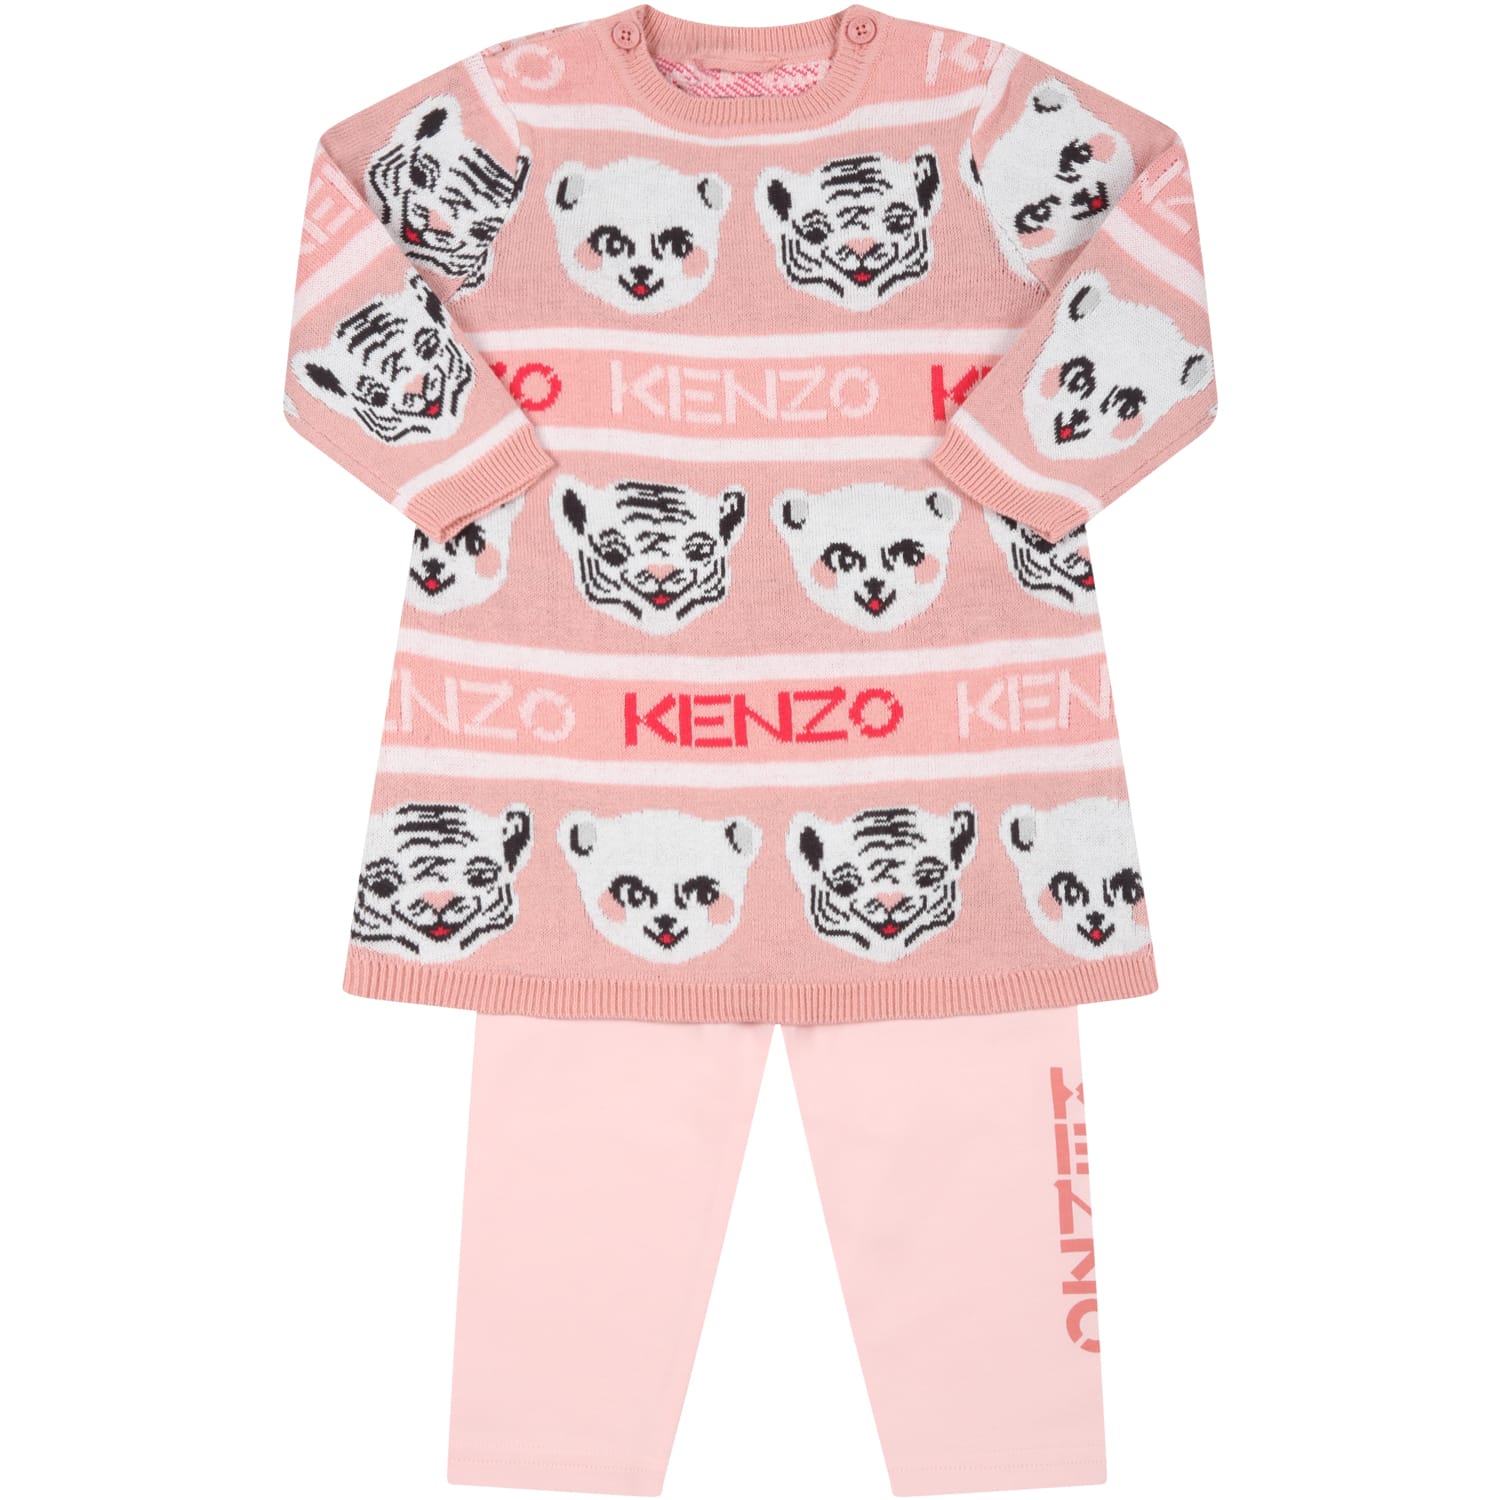 Kenzo Kids Pink Set For Baby Girl With Logos